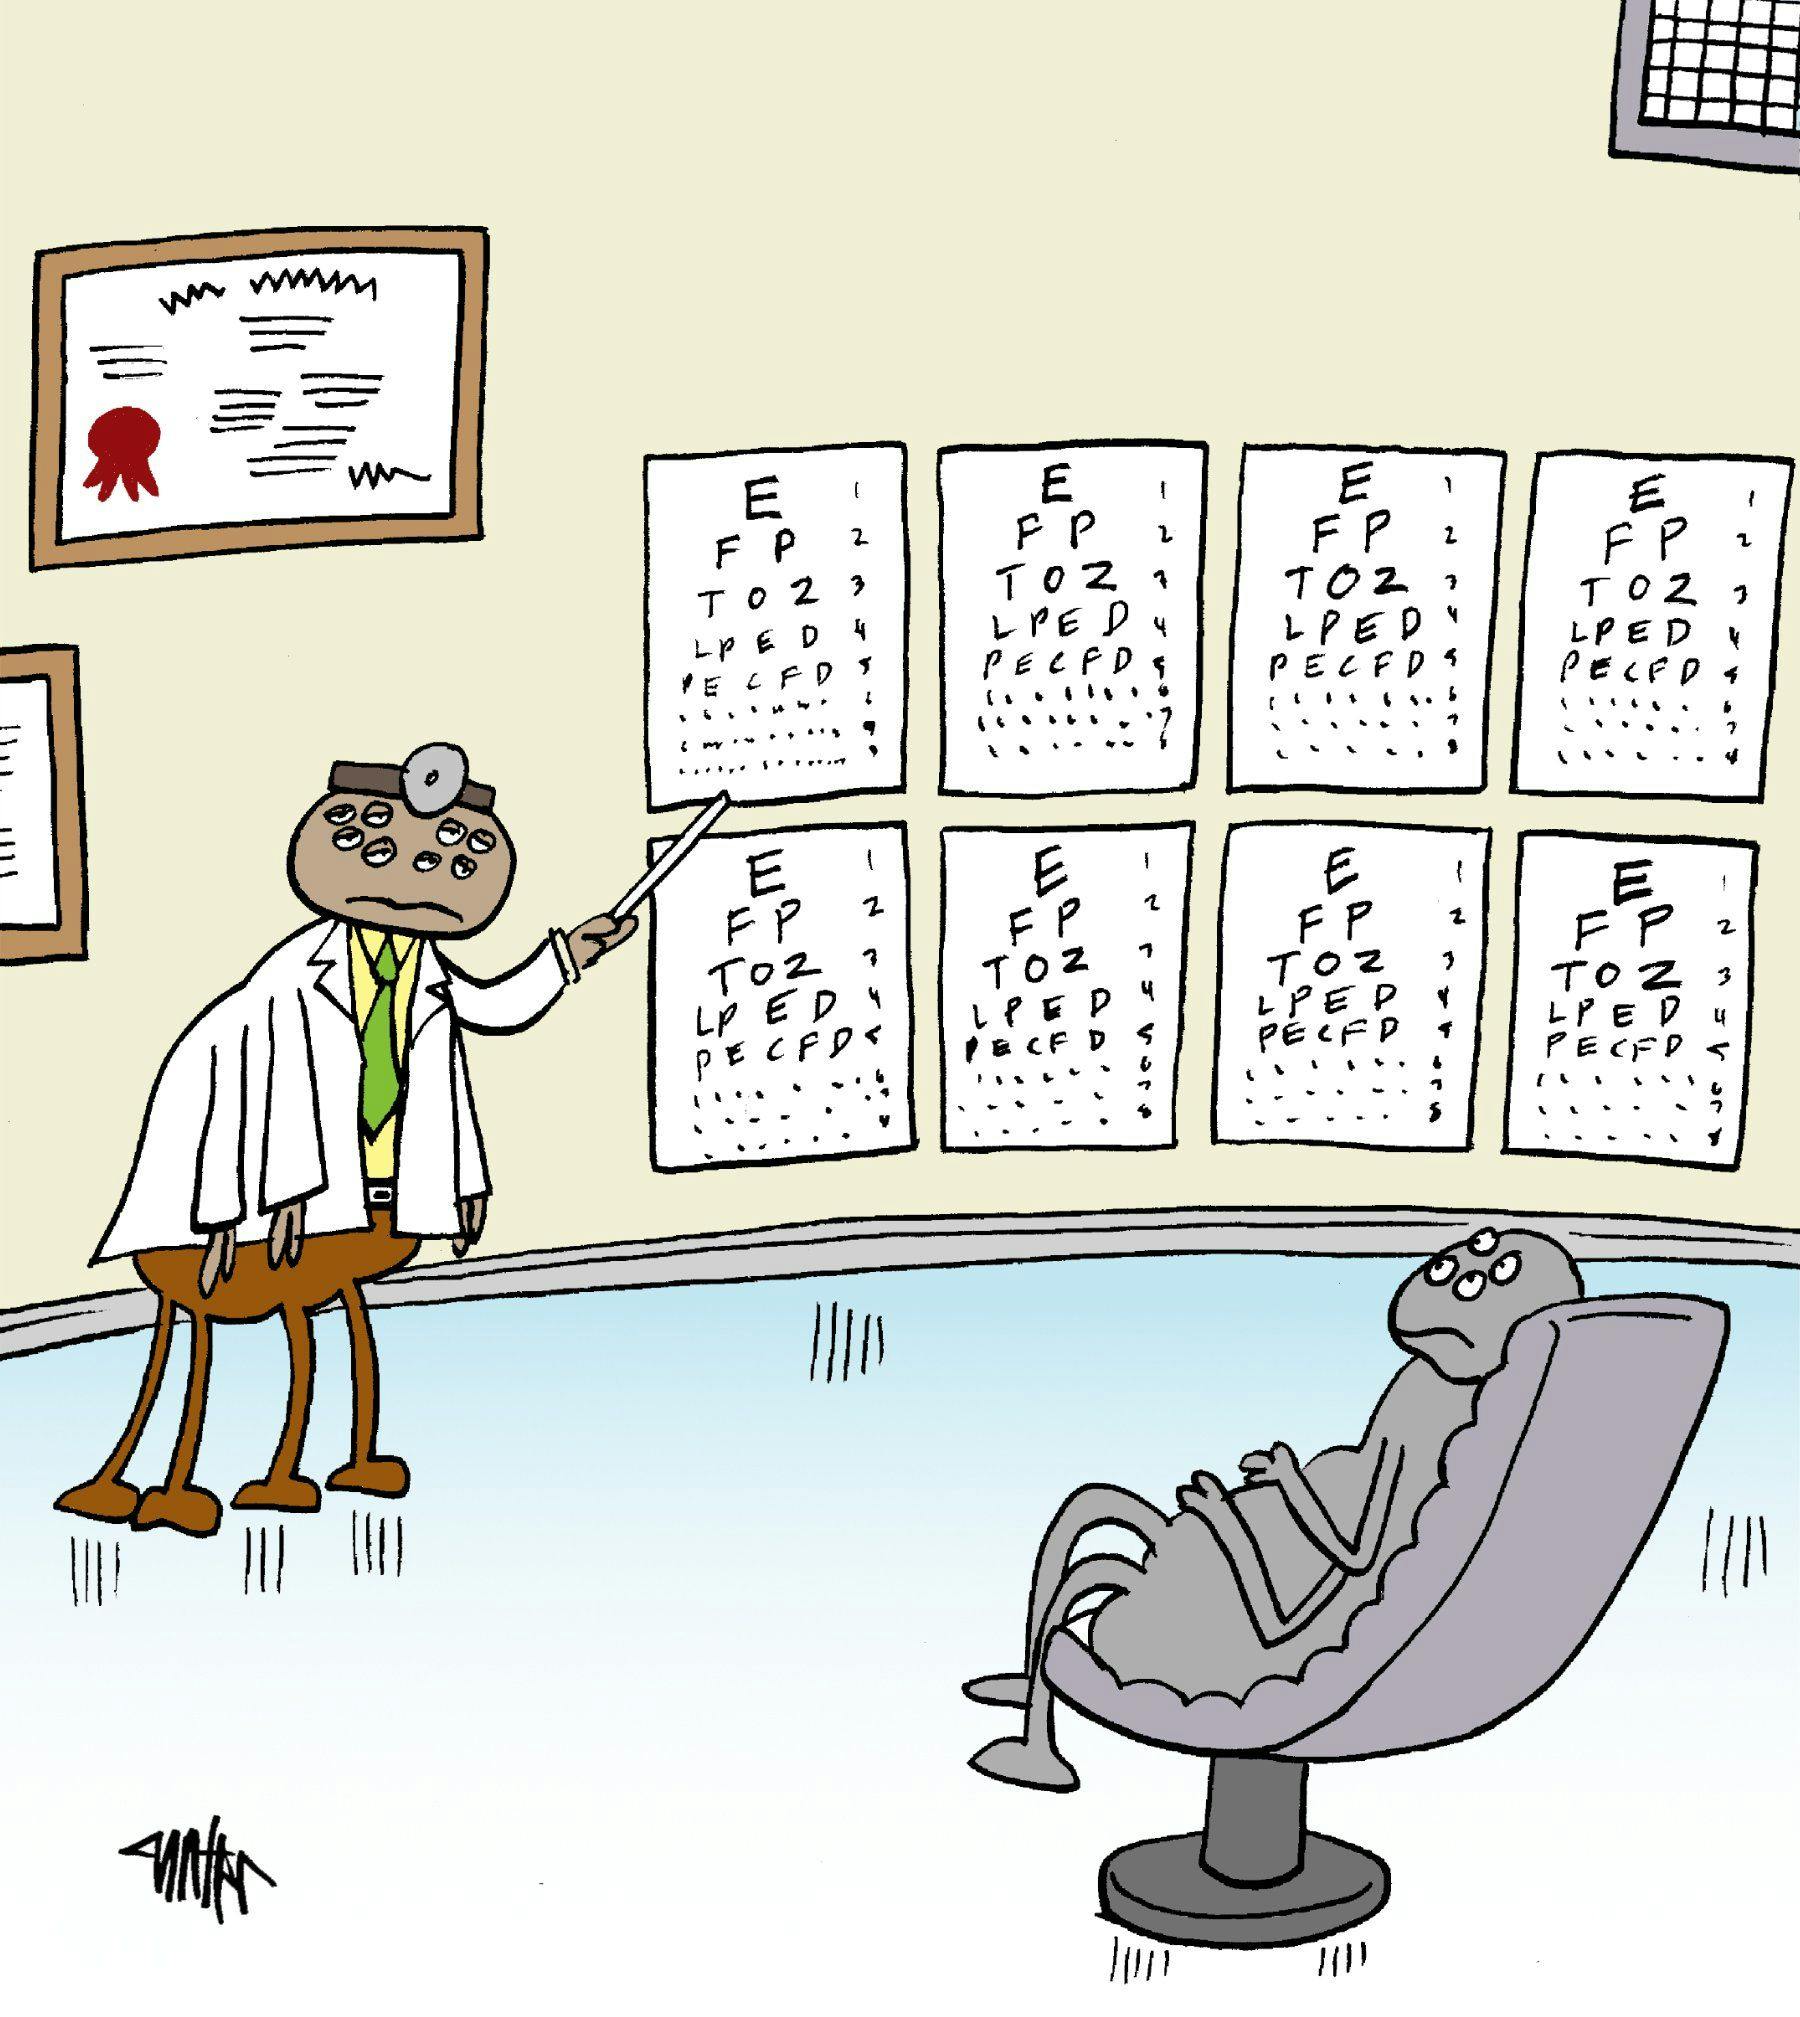 Struggles of the yearly spider-eye exam